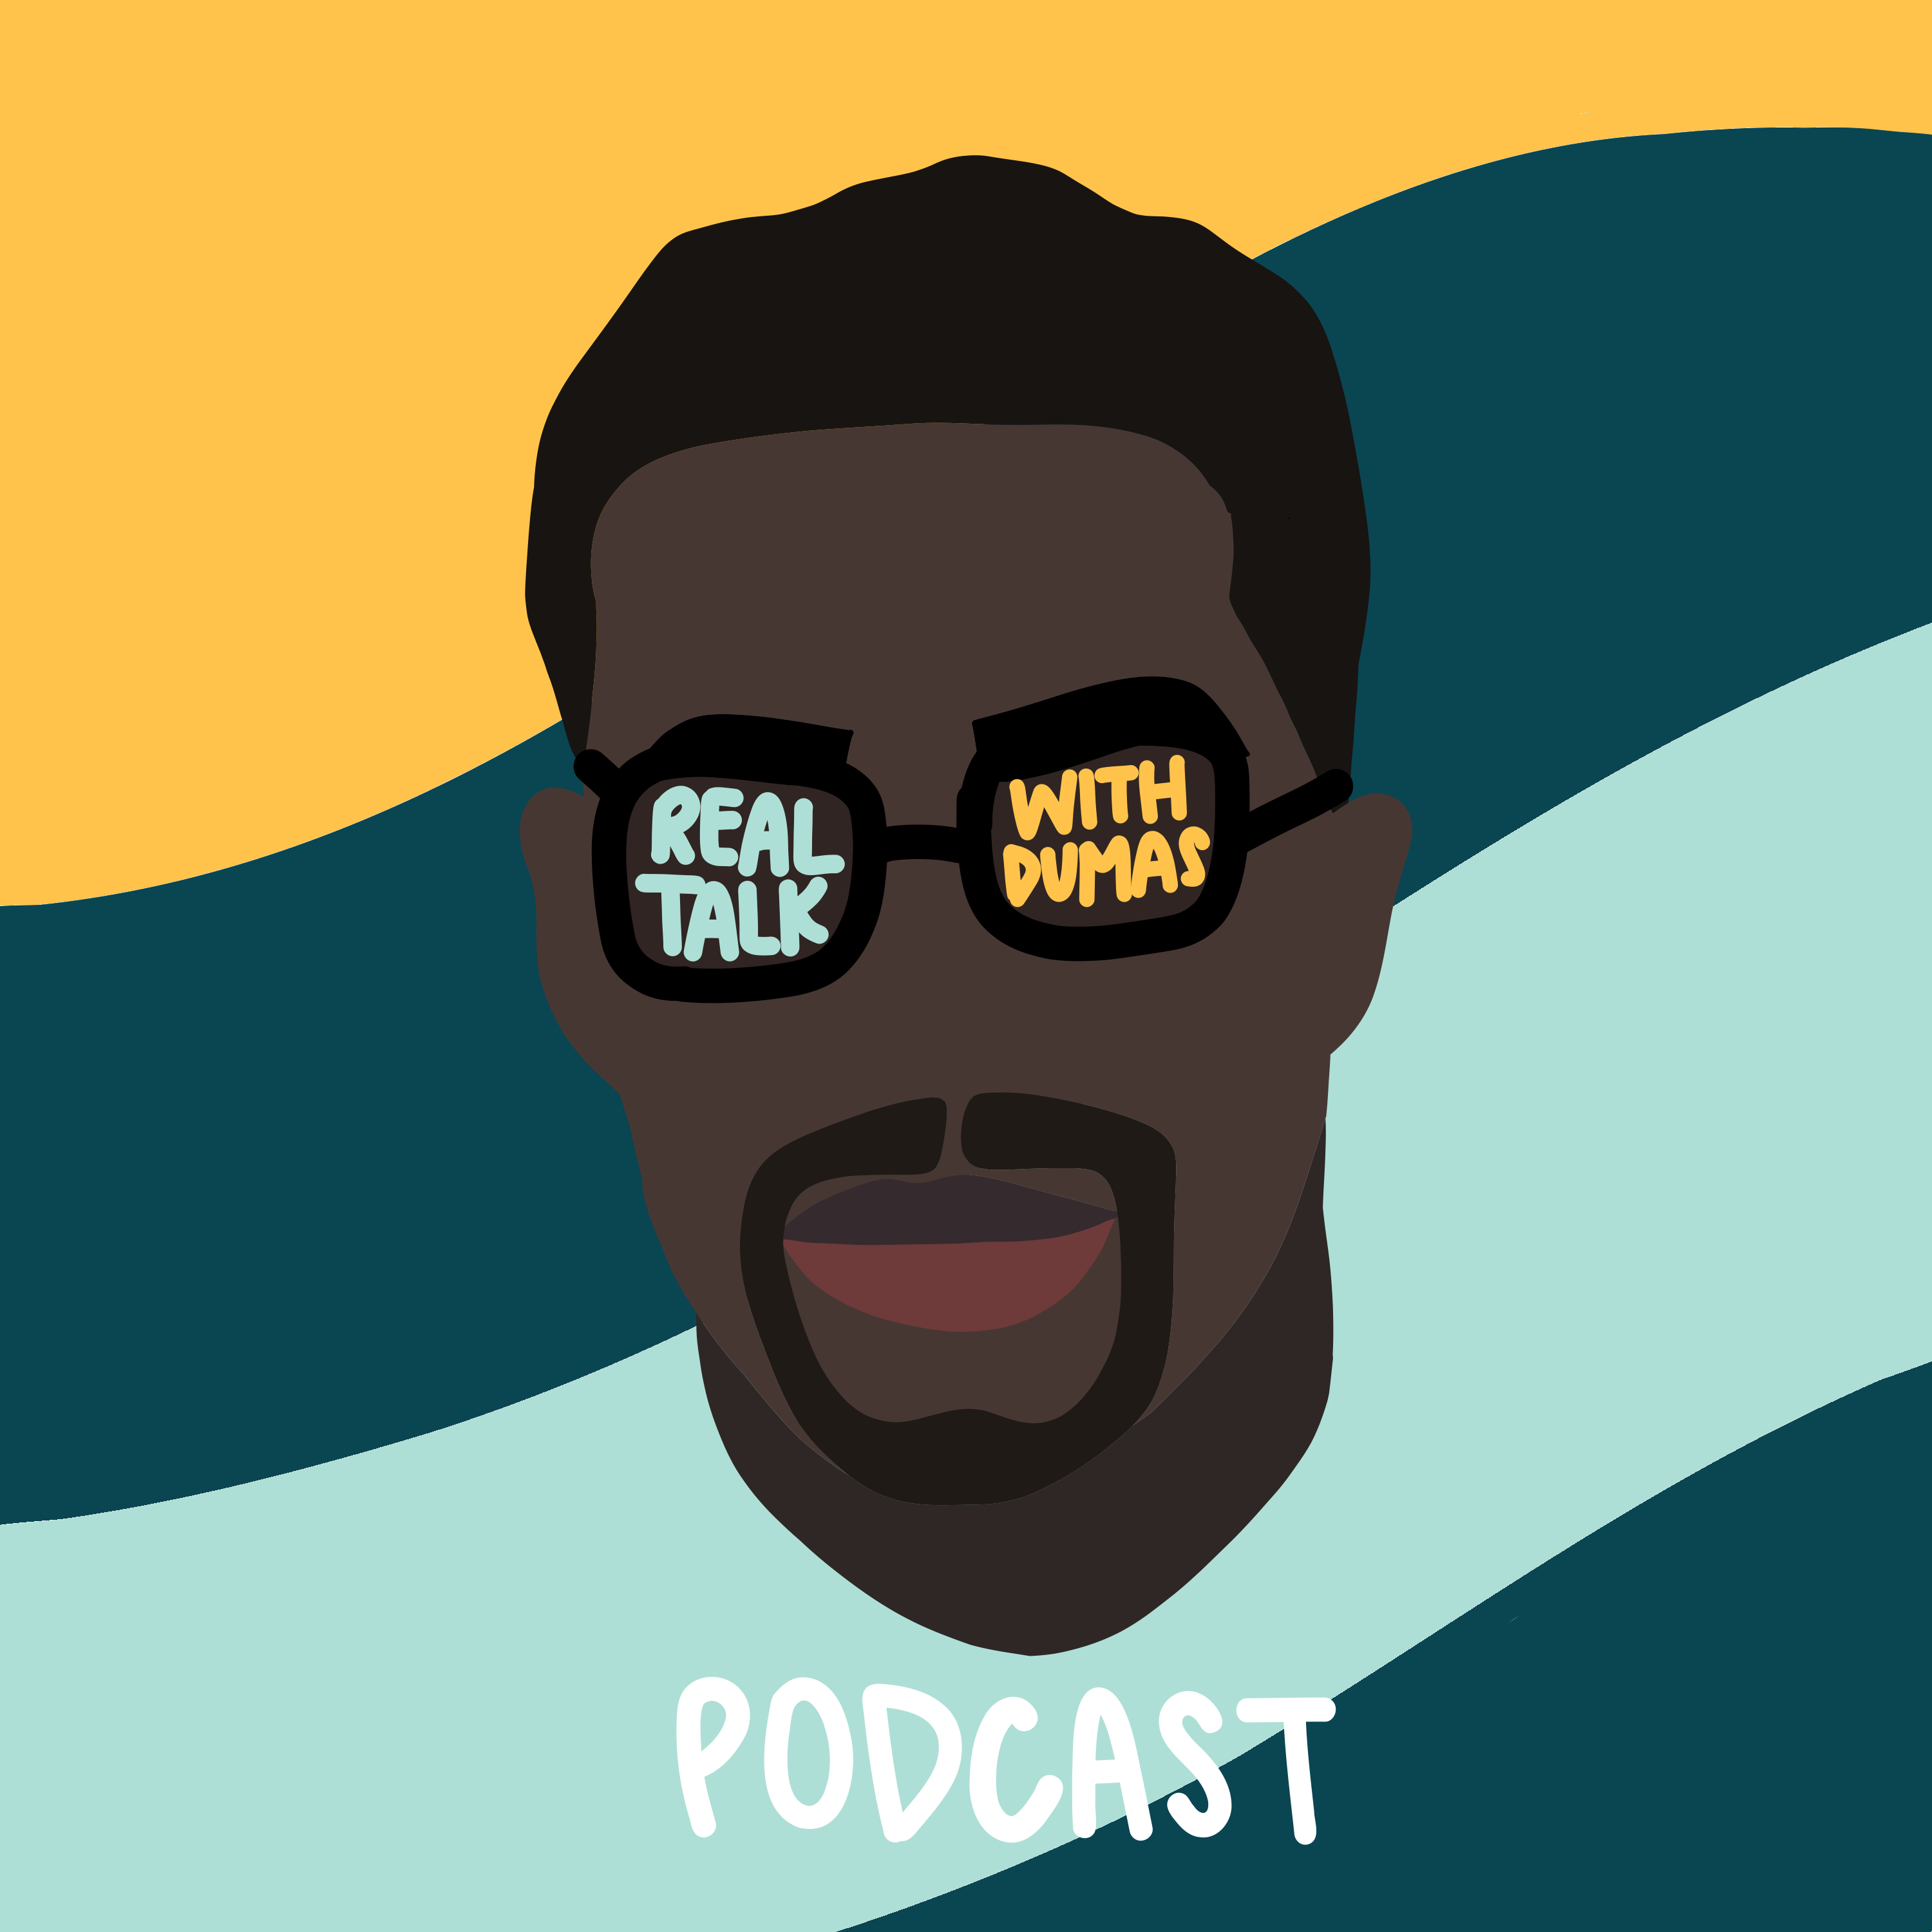 Real Talk With Dumas Podcast podcast